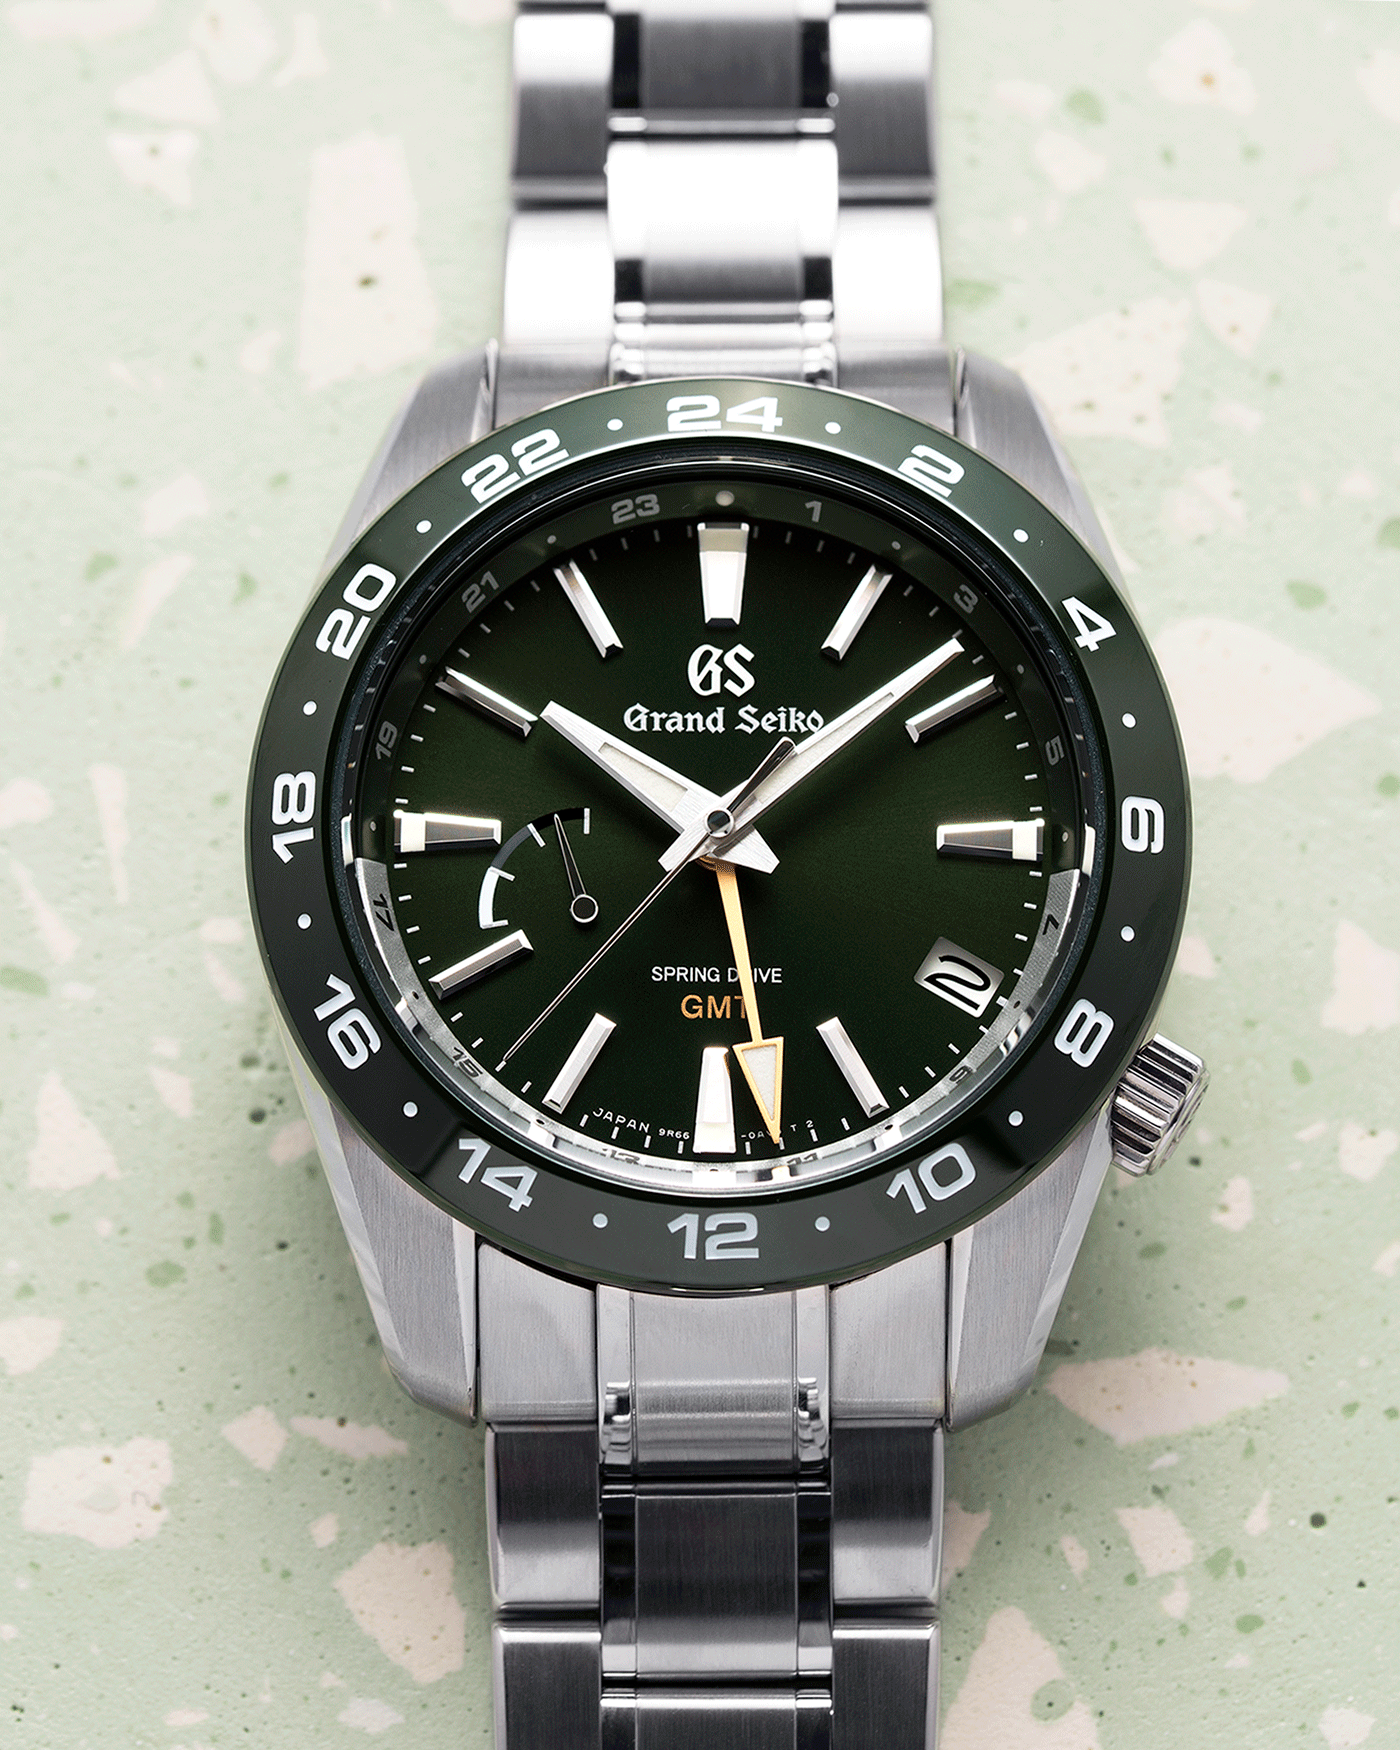 Brand: Grand Seiko Year: 2020 Reference Number: SBGE257 Spring Drive Material: Stainless Steel Movement: Cal. 9R66 Case Diameter: 40.5mm Bracelet: Grand Seiko Stainless Steel Bracelet